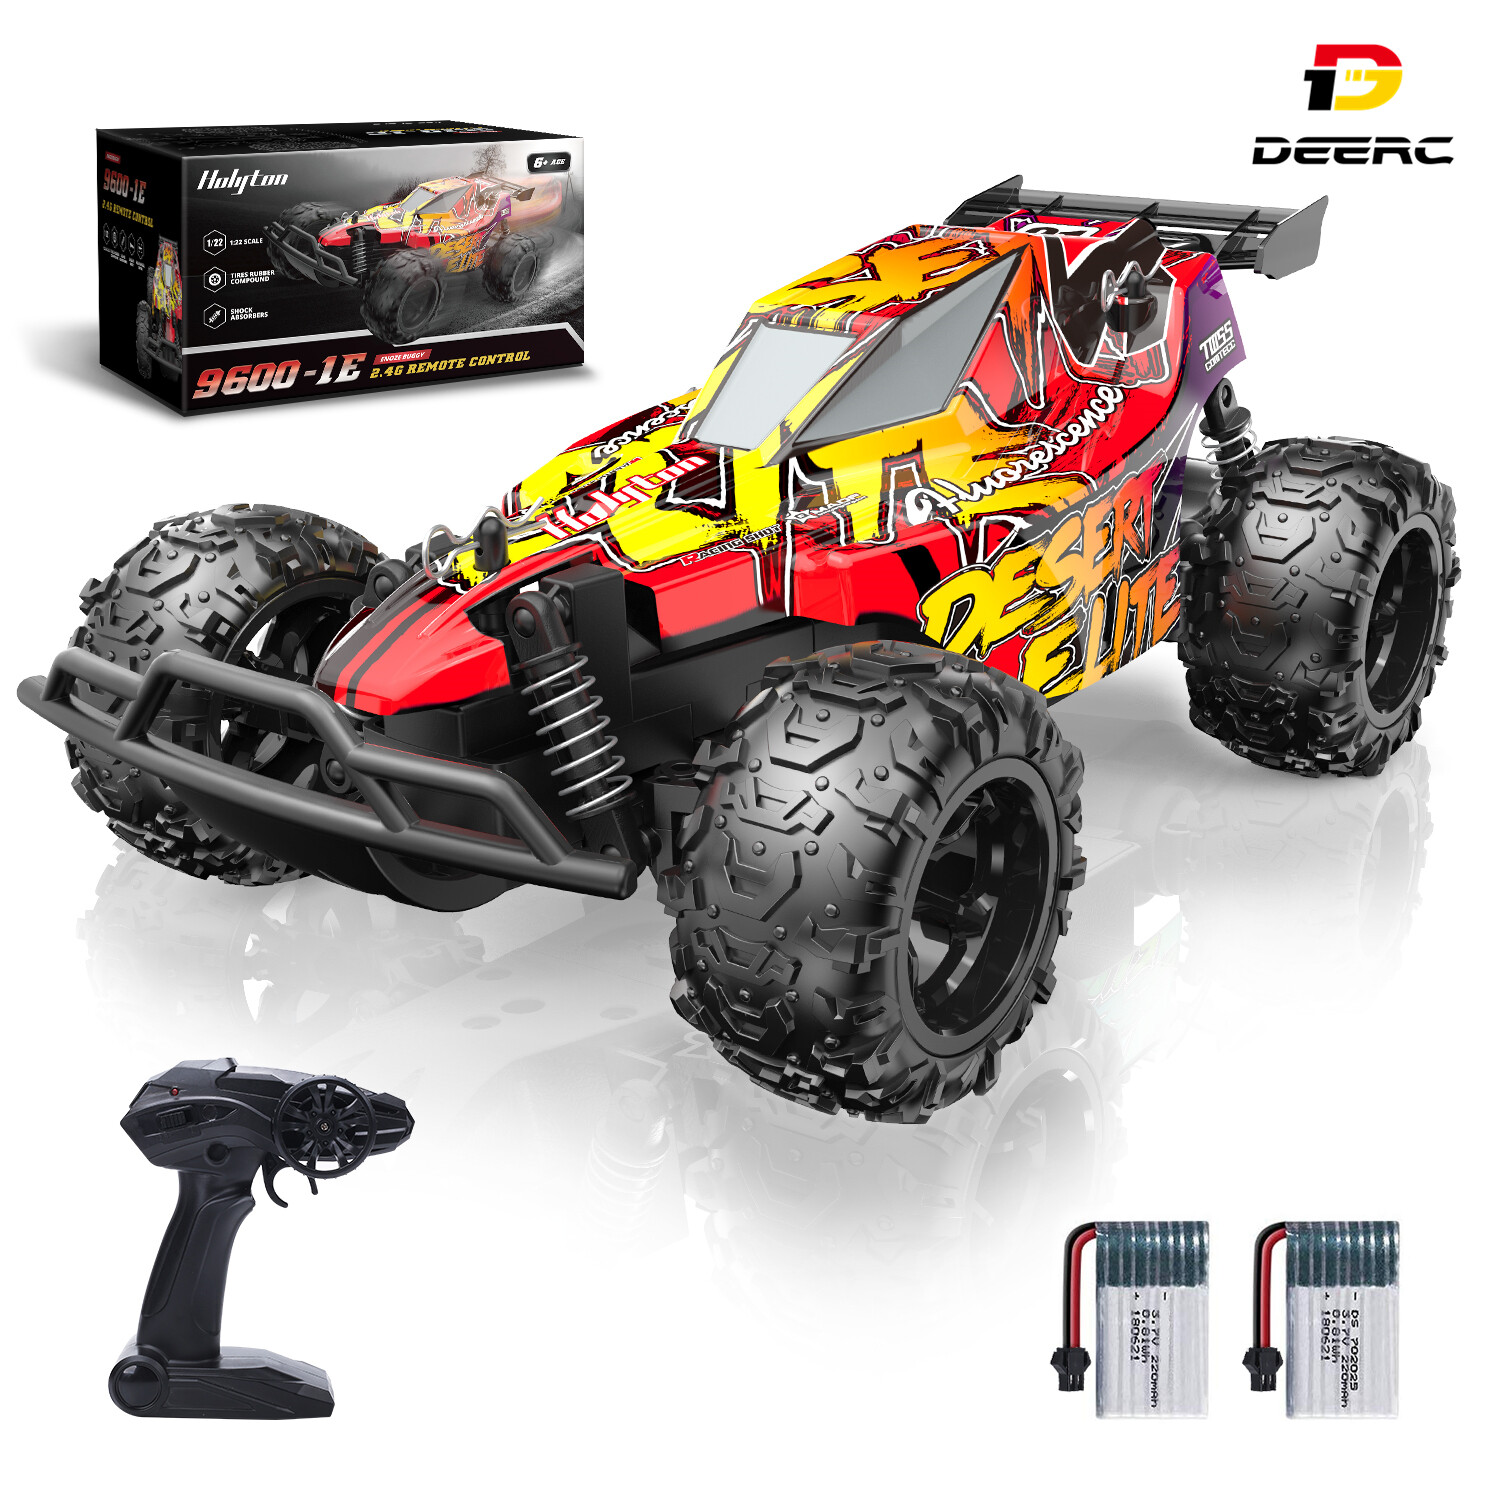 Details about   Holyton Remote Control Car Scale RC High Speed Off Road Waterproof 4WD Adult Kid 